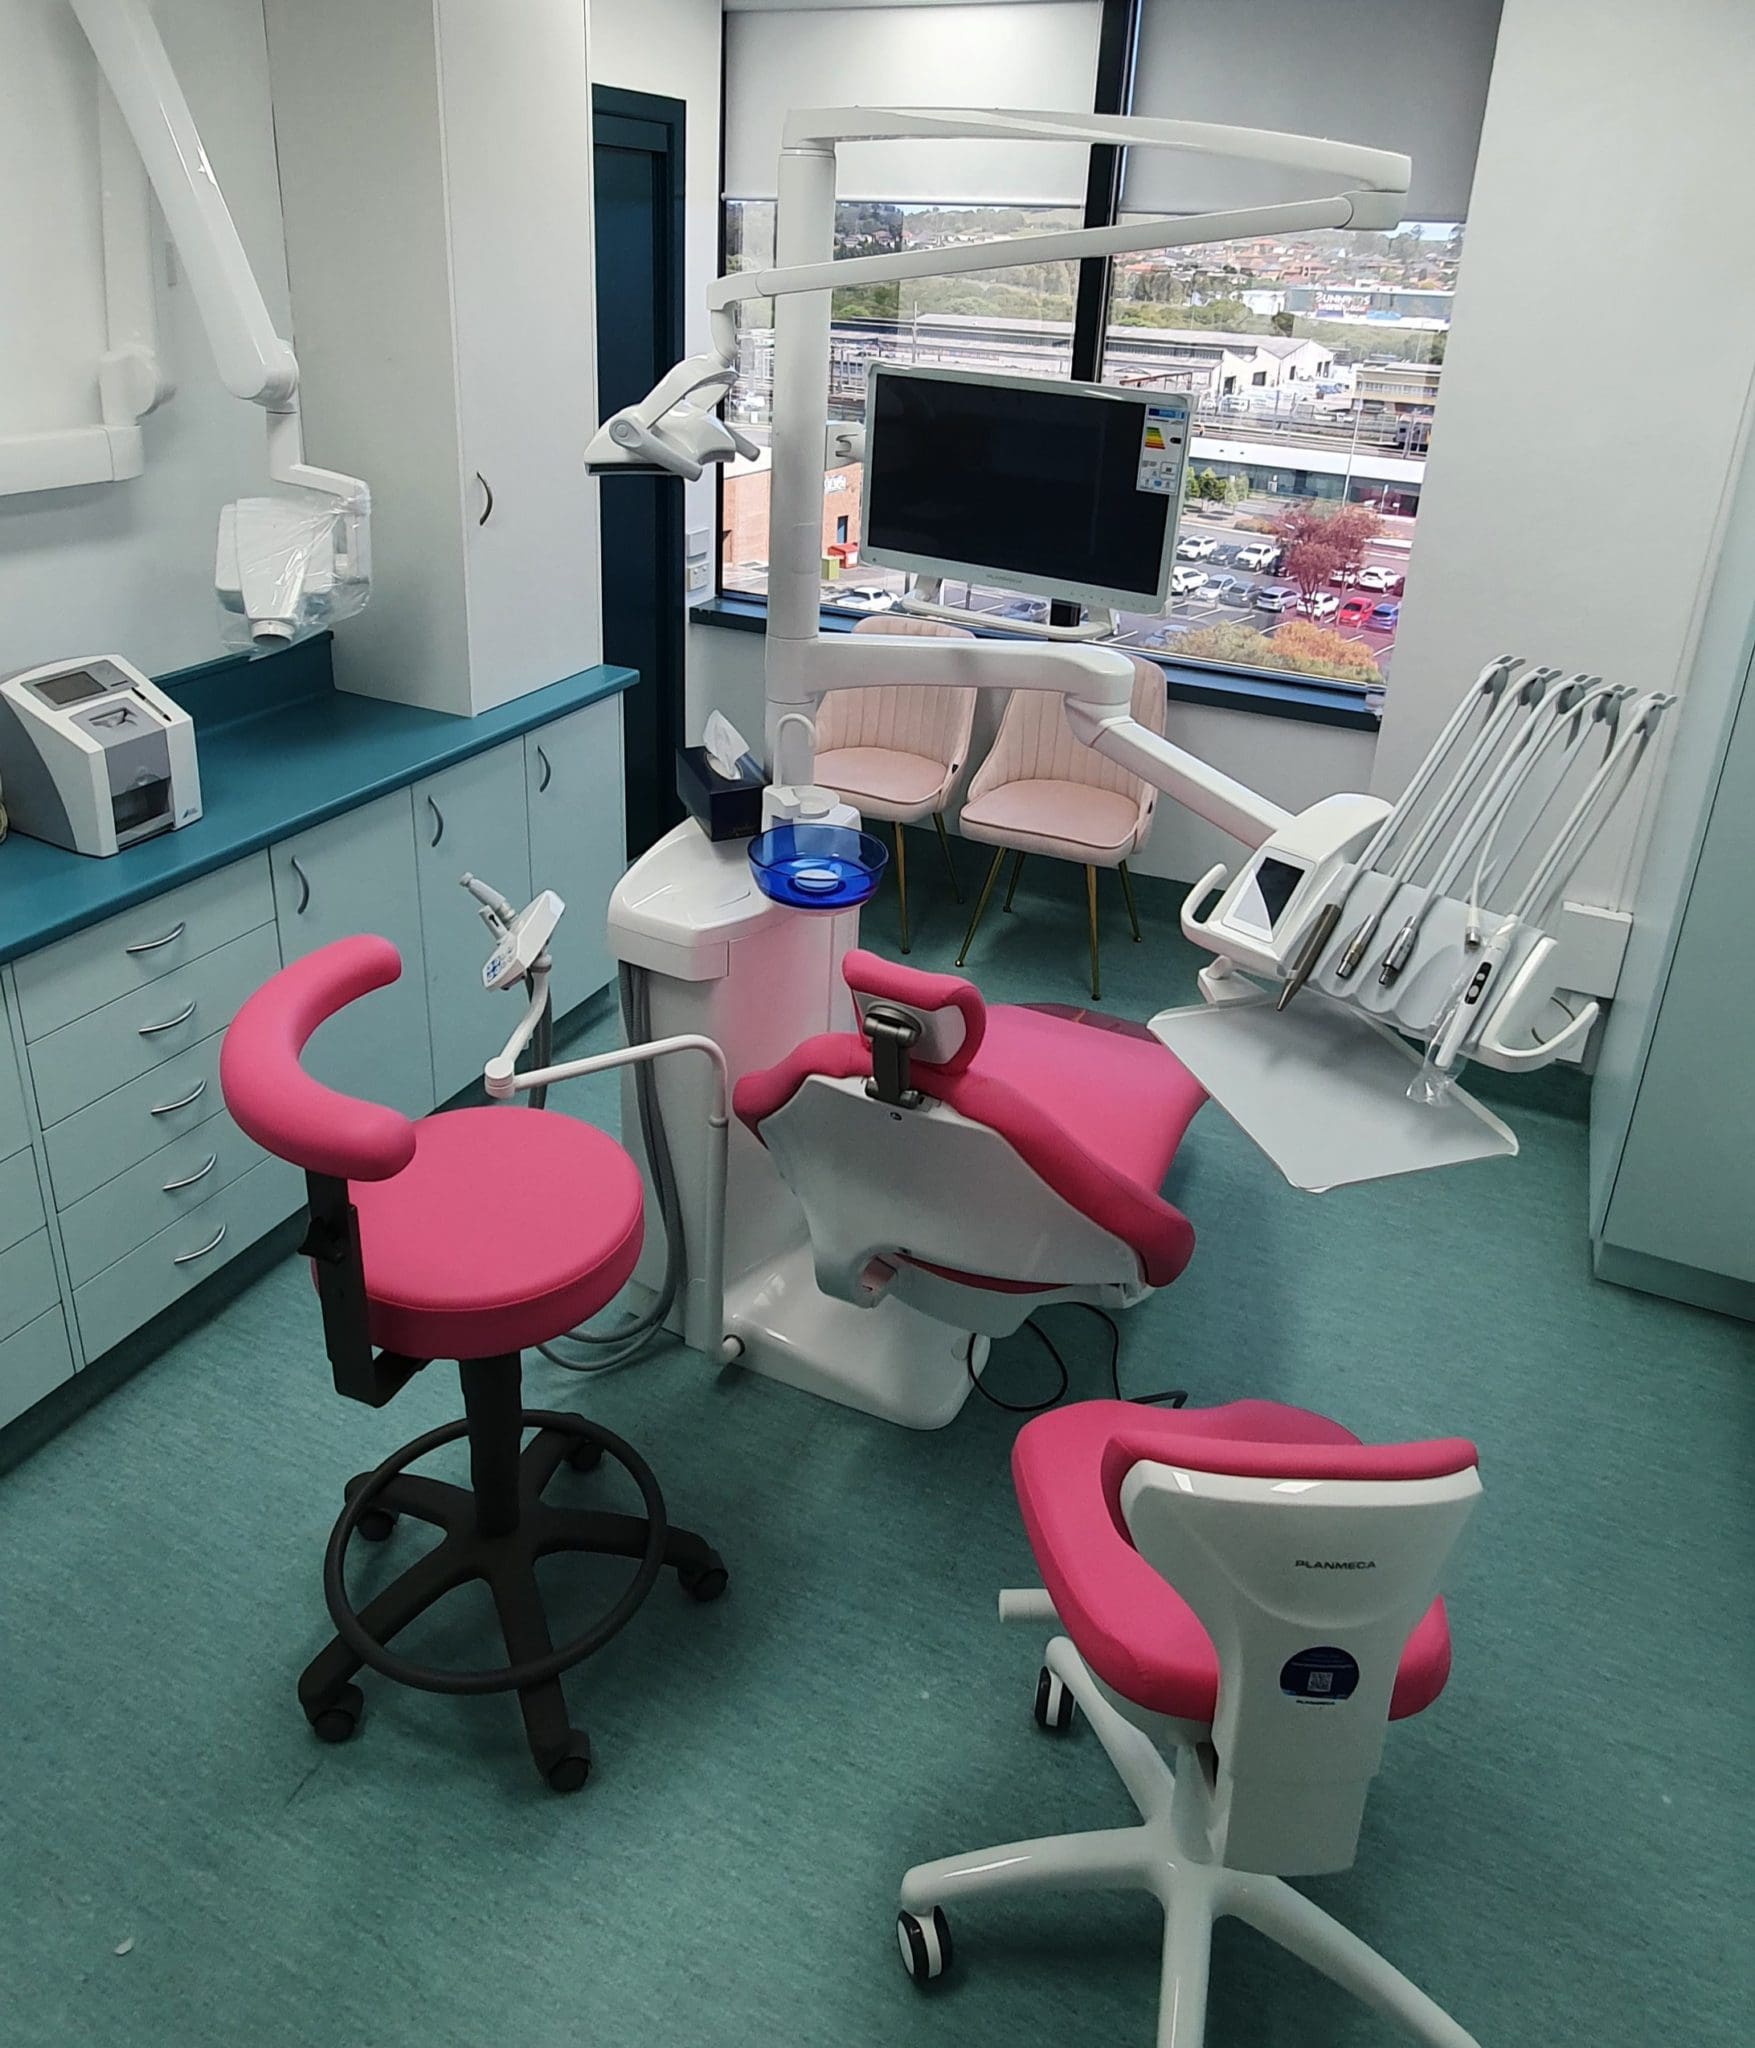 Campbelltown Family Dental Care Surgery 3 pink room